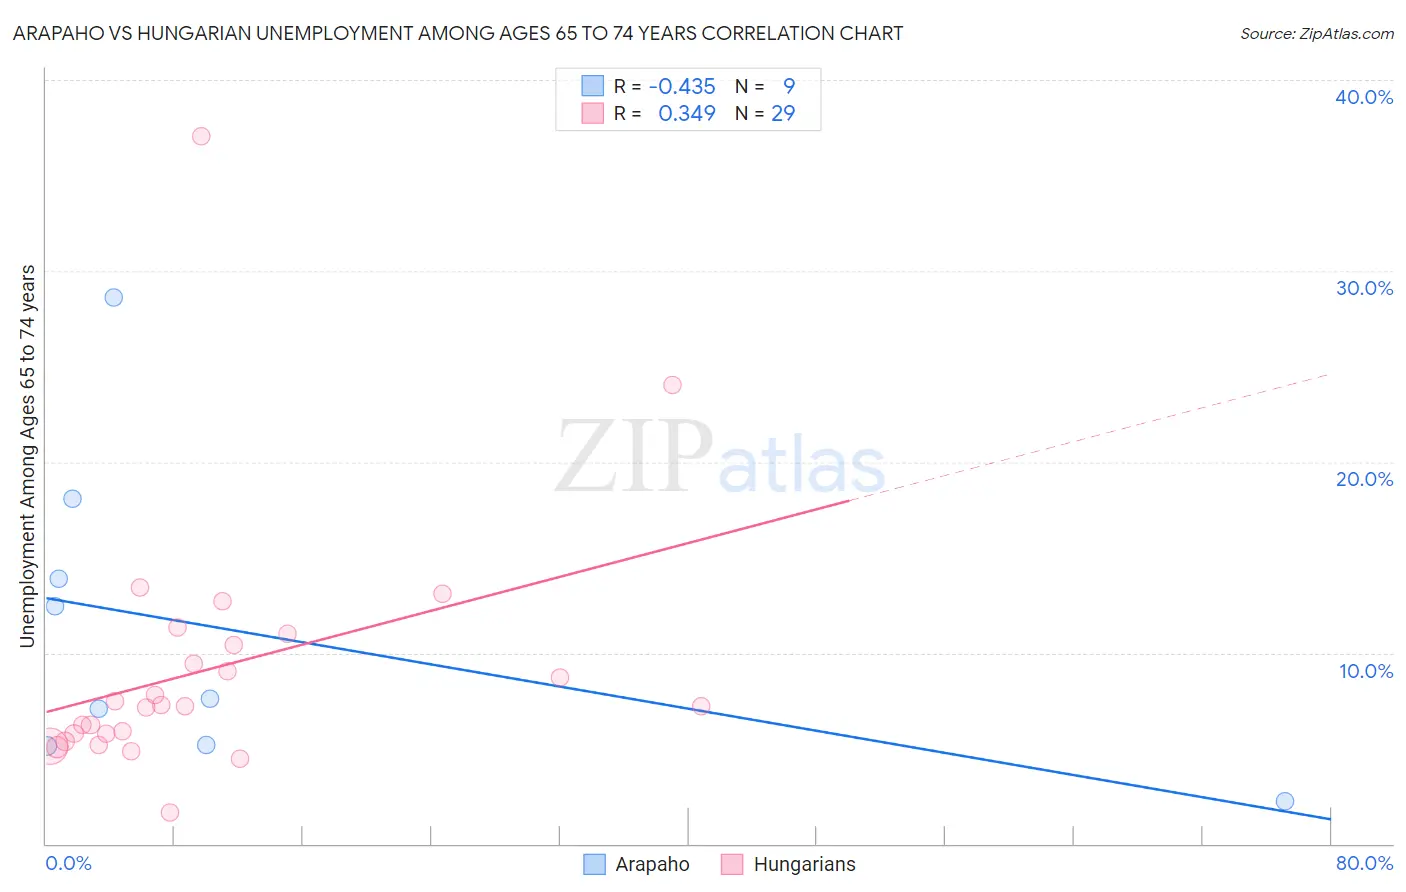 Arapaho vs Hungarian Unemployment Among Ages 65 to 74 years